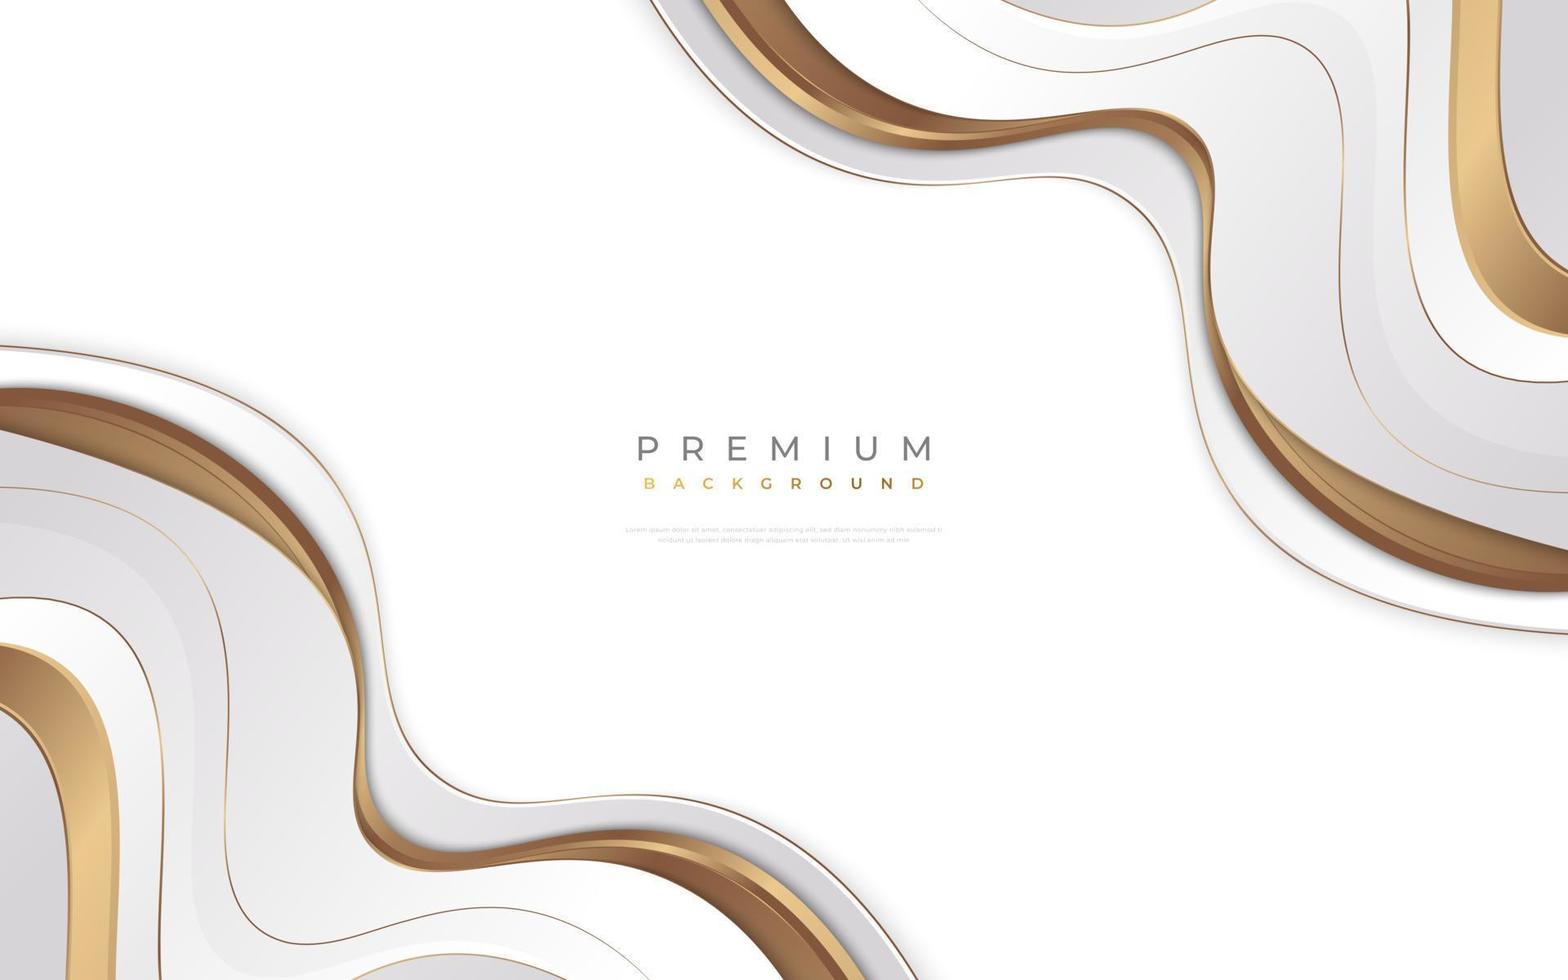 Luxury White and Gold Background with Golden Lines and Paper Cut Style. Premium Gray and Gold Background for Award, Nomination, Ceremony, Formal Invitation or Certificate Design vector